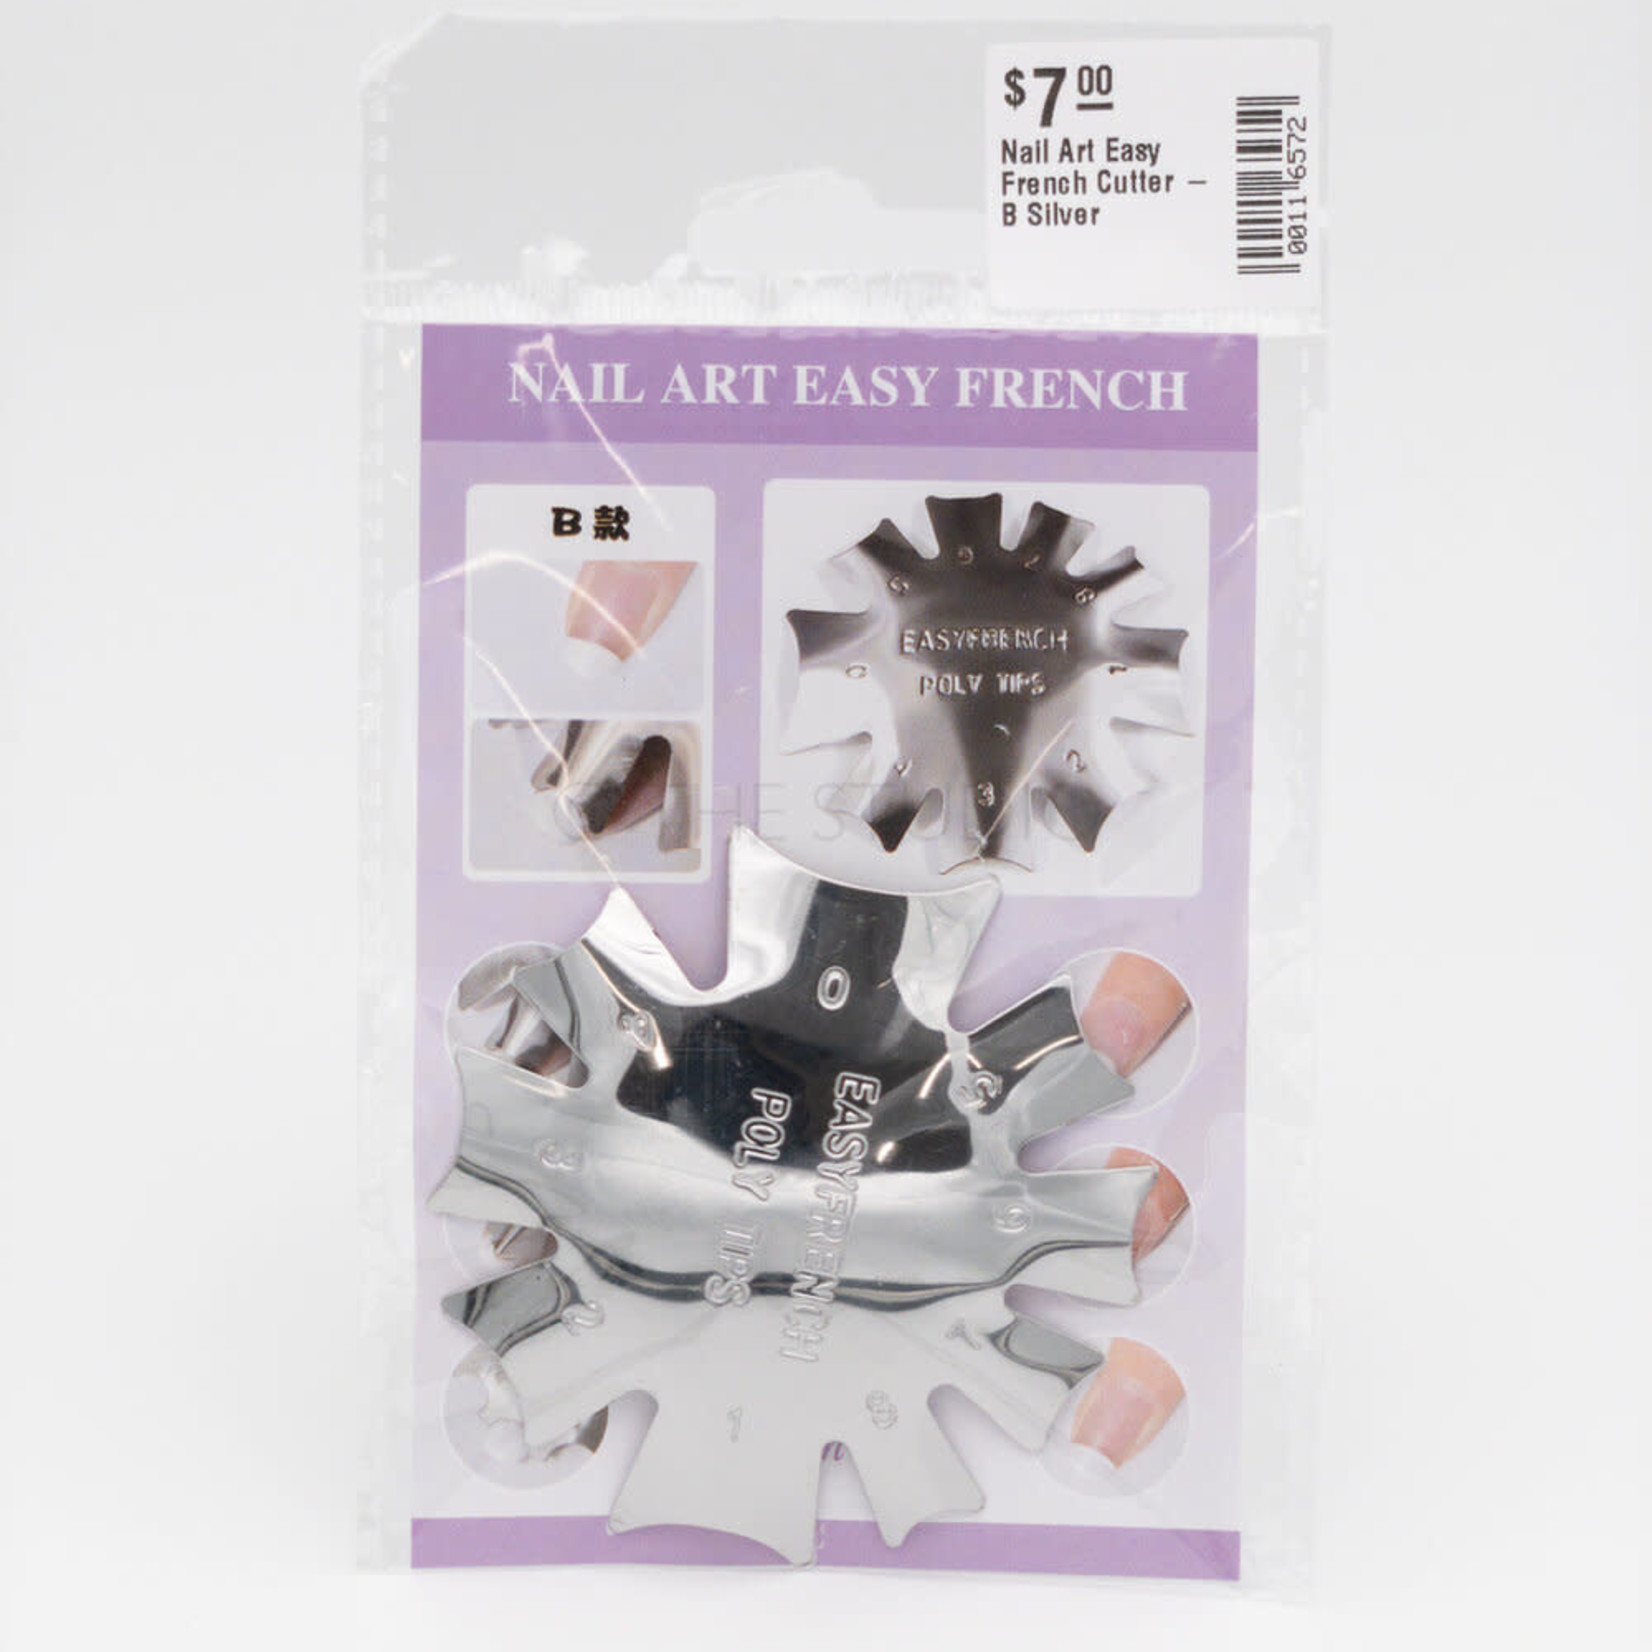 The Studio Nail Art Easy French Cutter - B